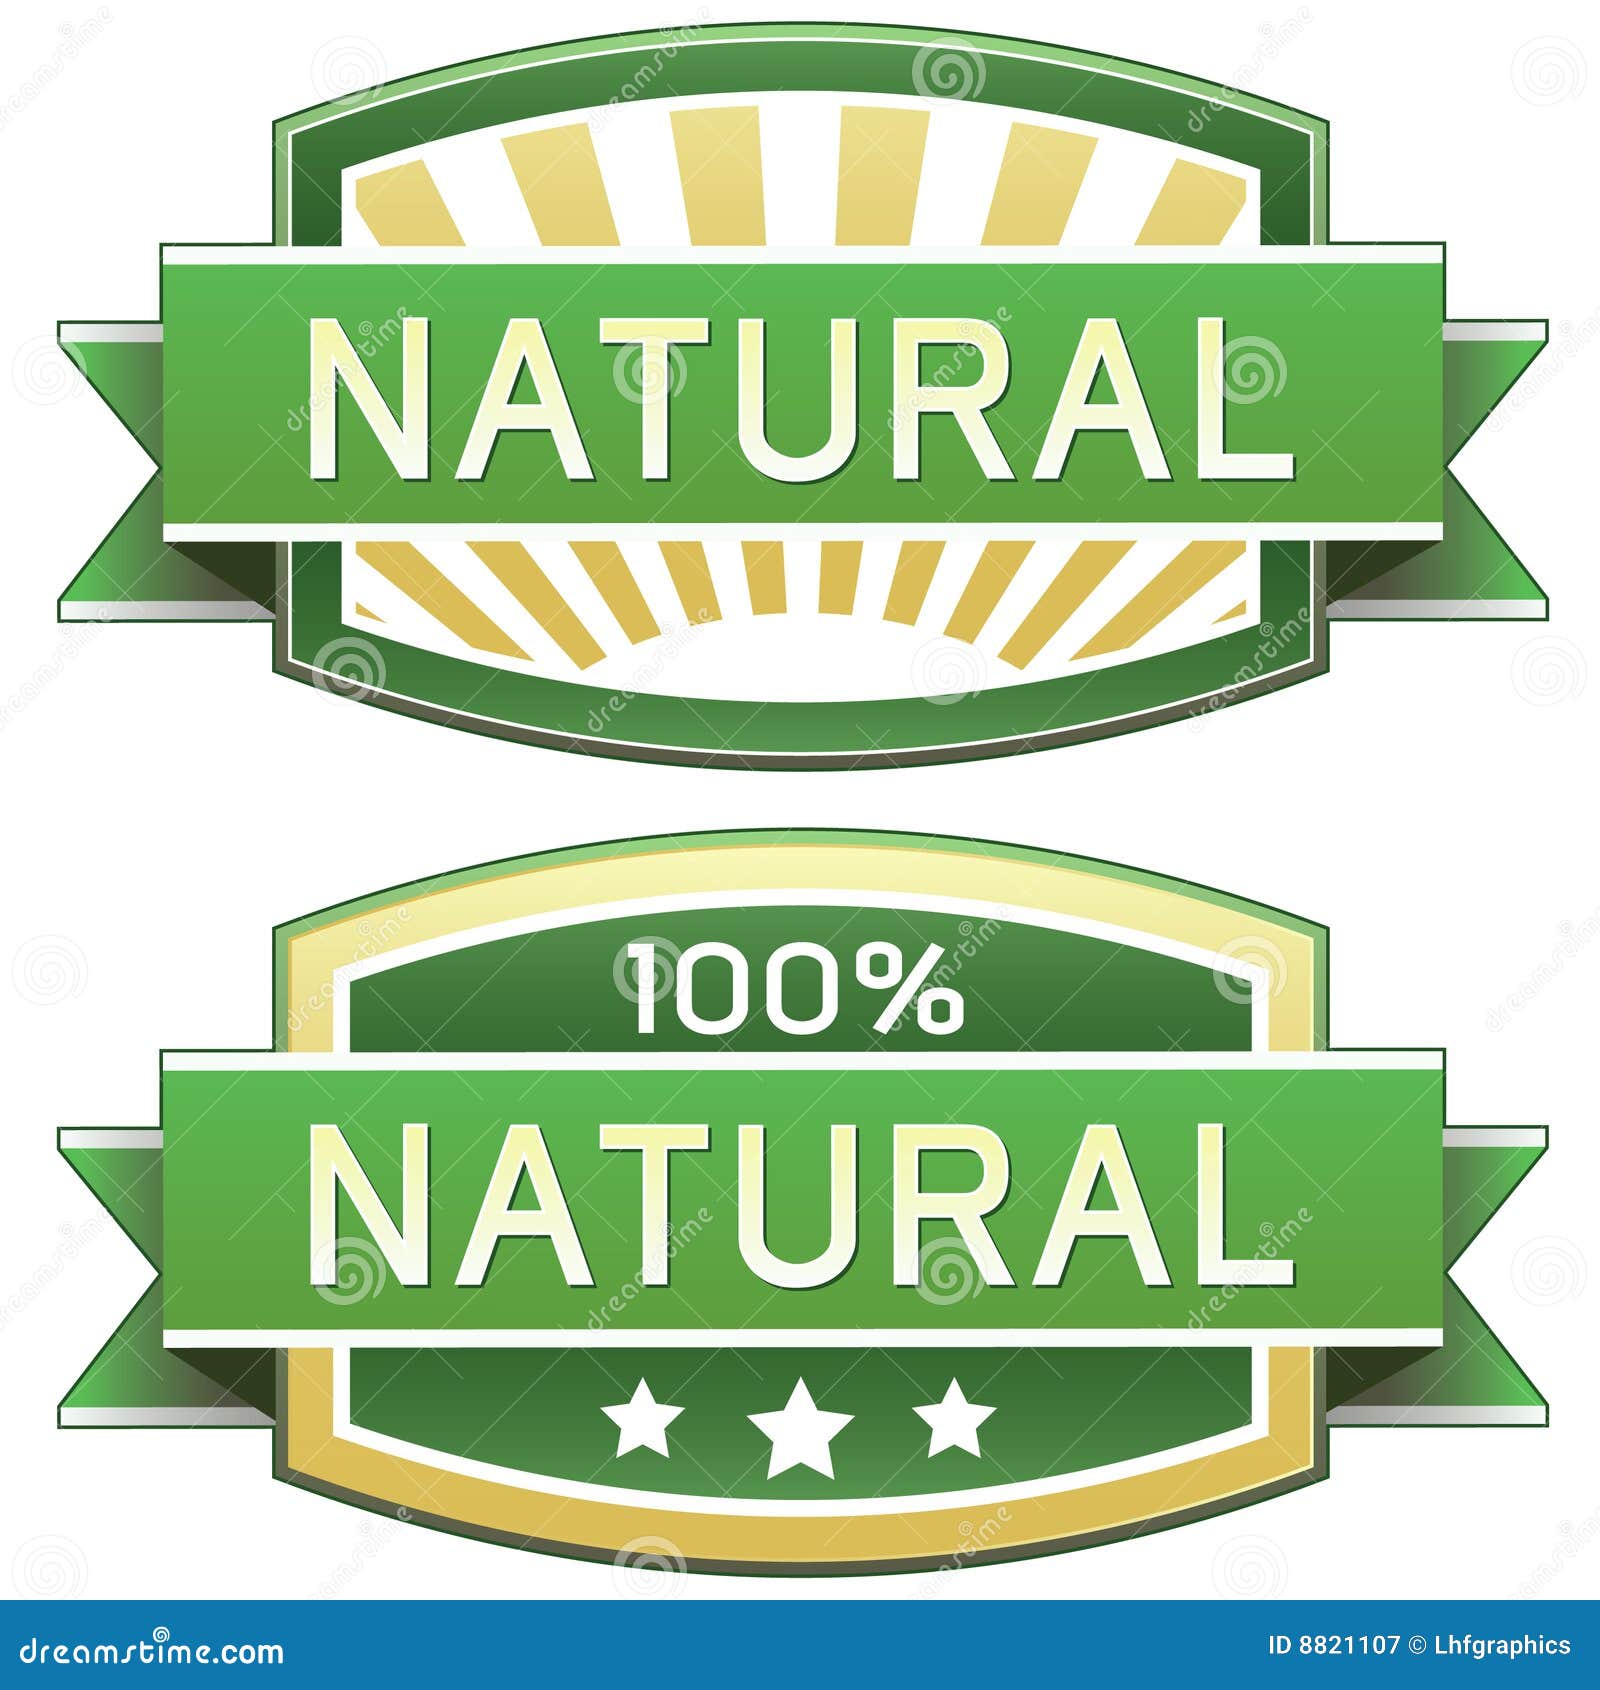 natural product or food label